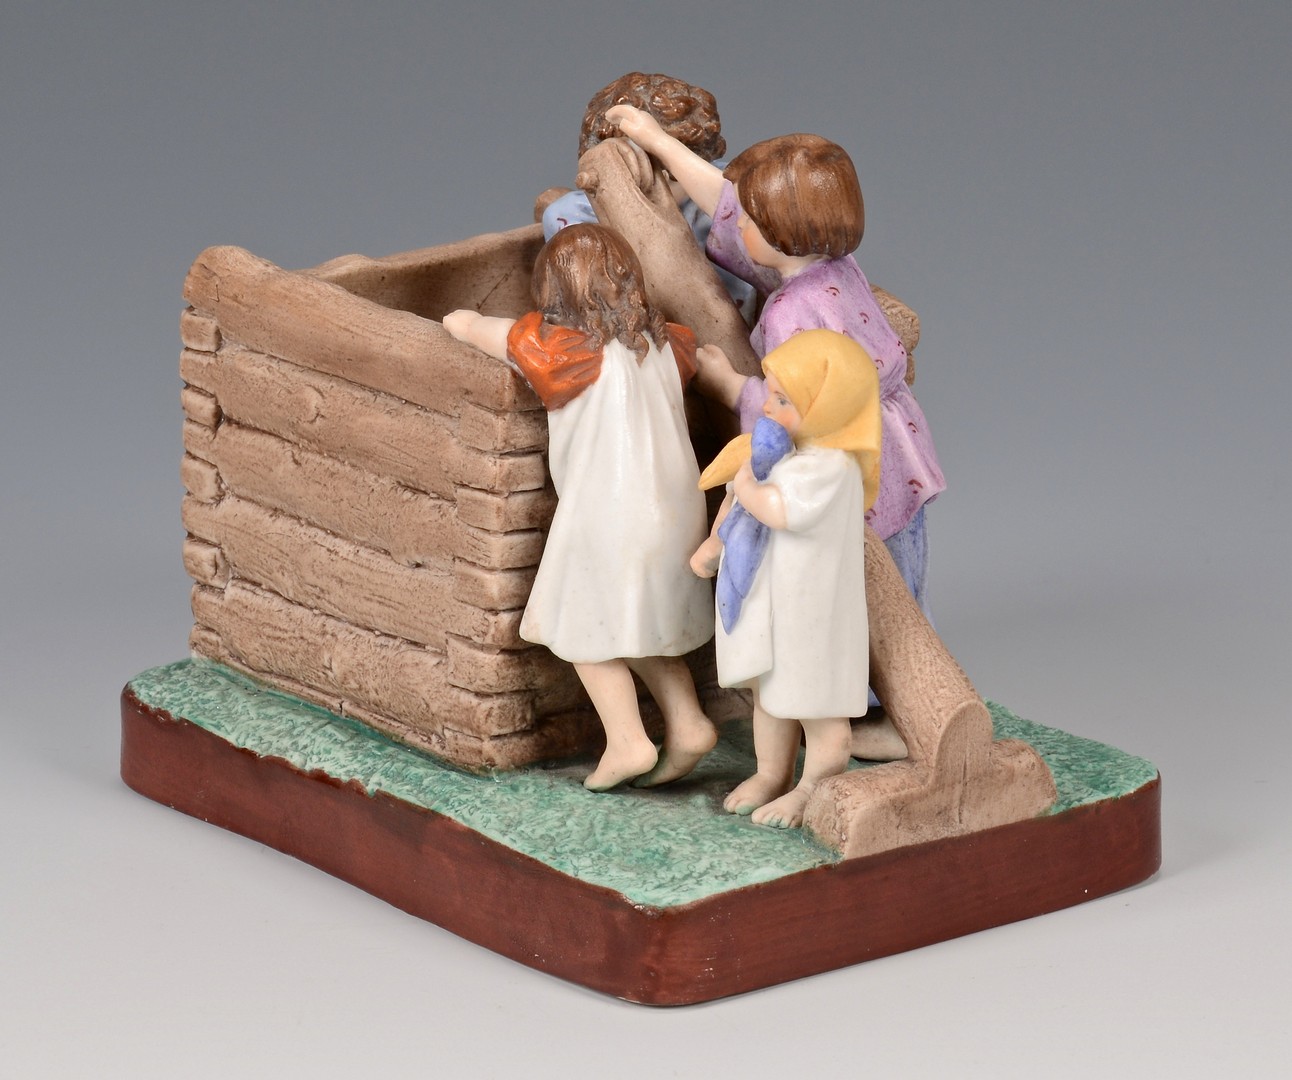 Lot 453: Imperial Porcelain, Russian Gardner "Children at the Well"